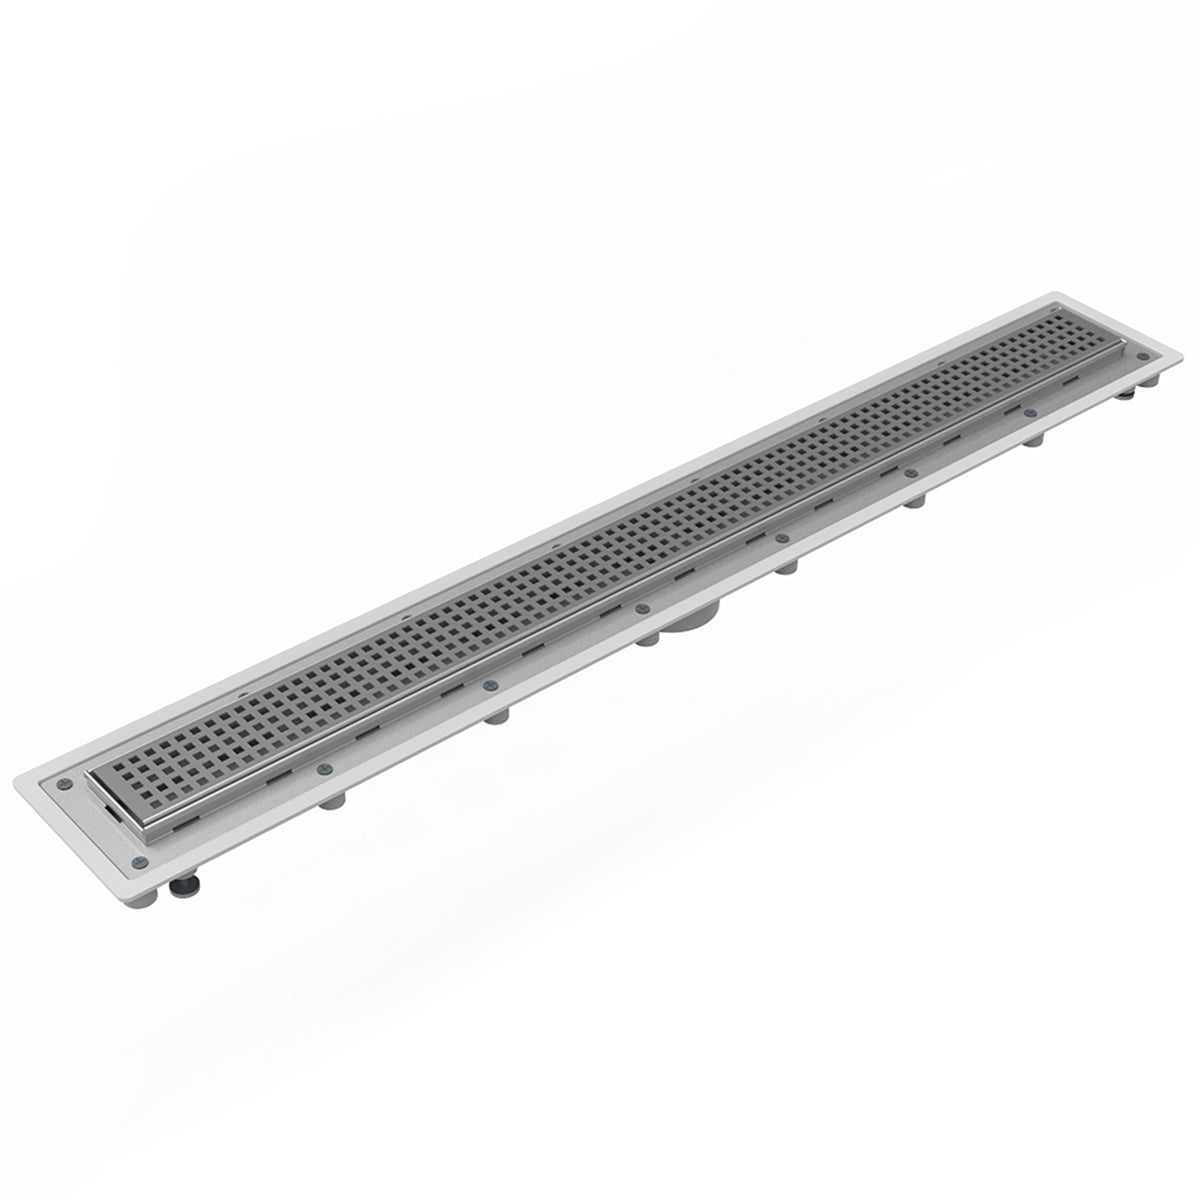 Infinity Drain 24" Universal Infinity Linear Drain Kit with PVC Channel and Squares Pattern Grate